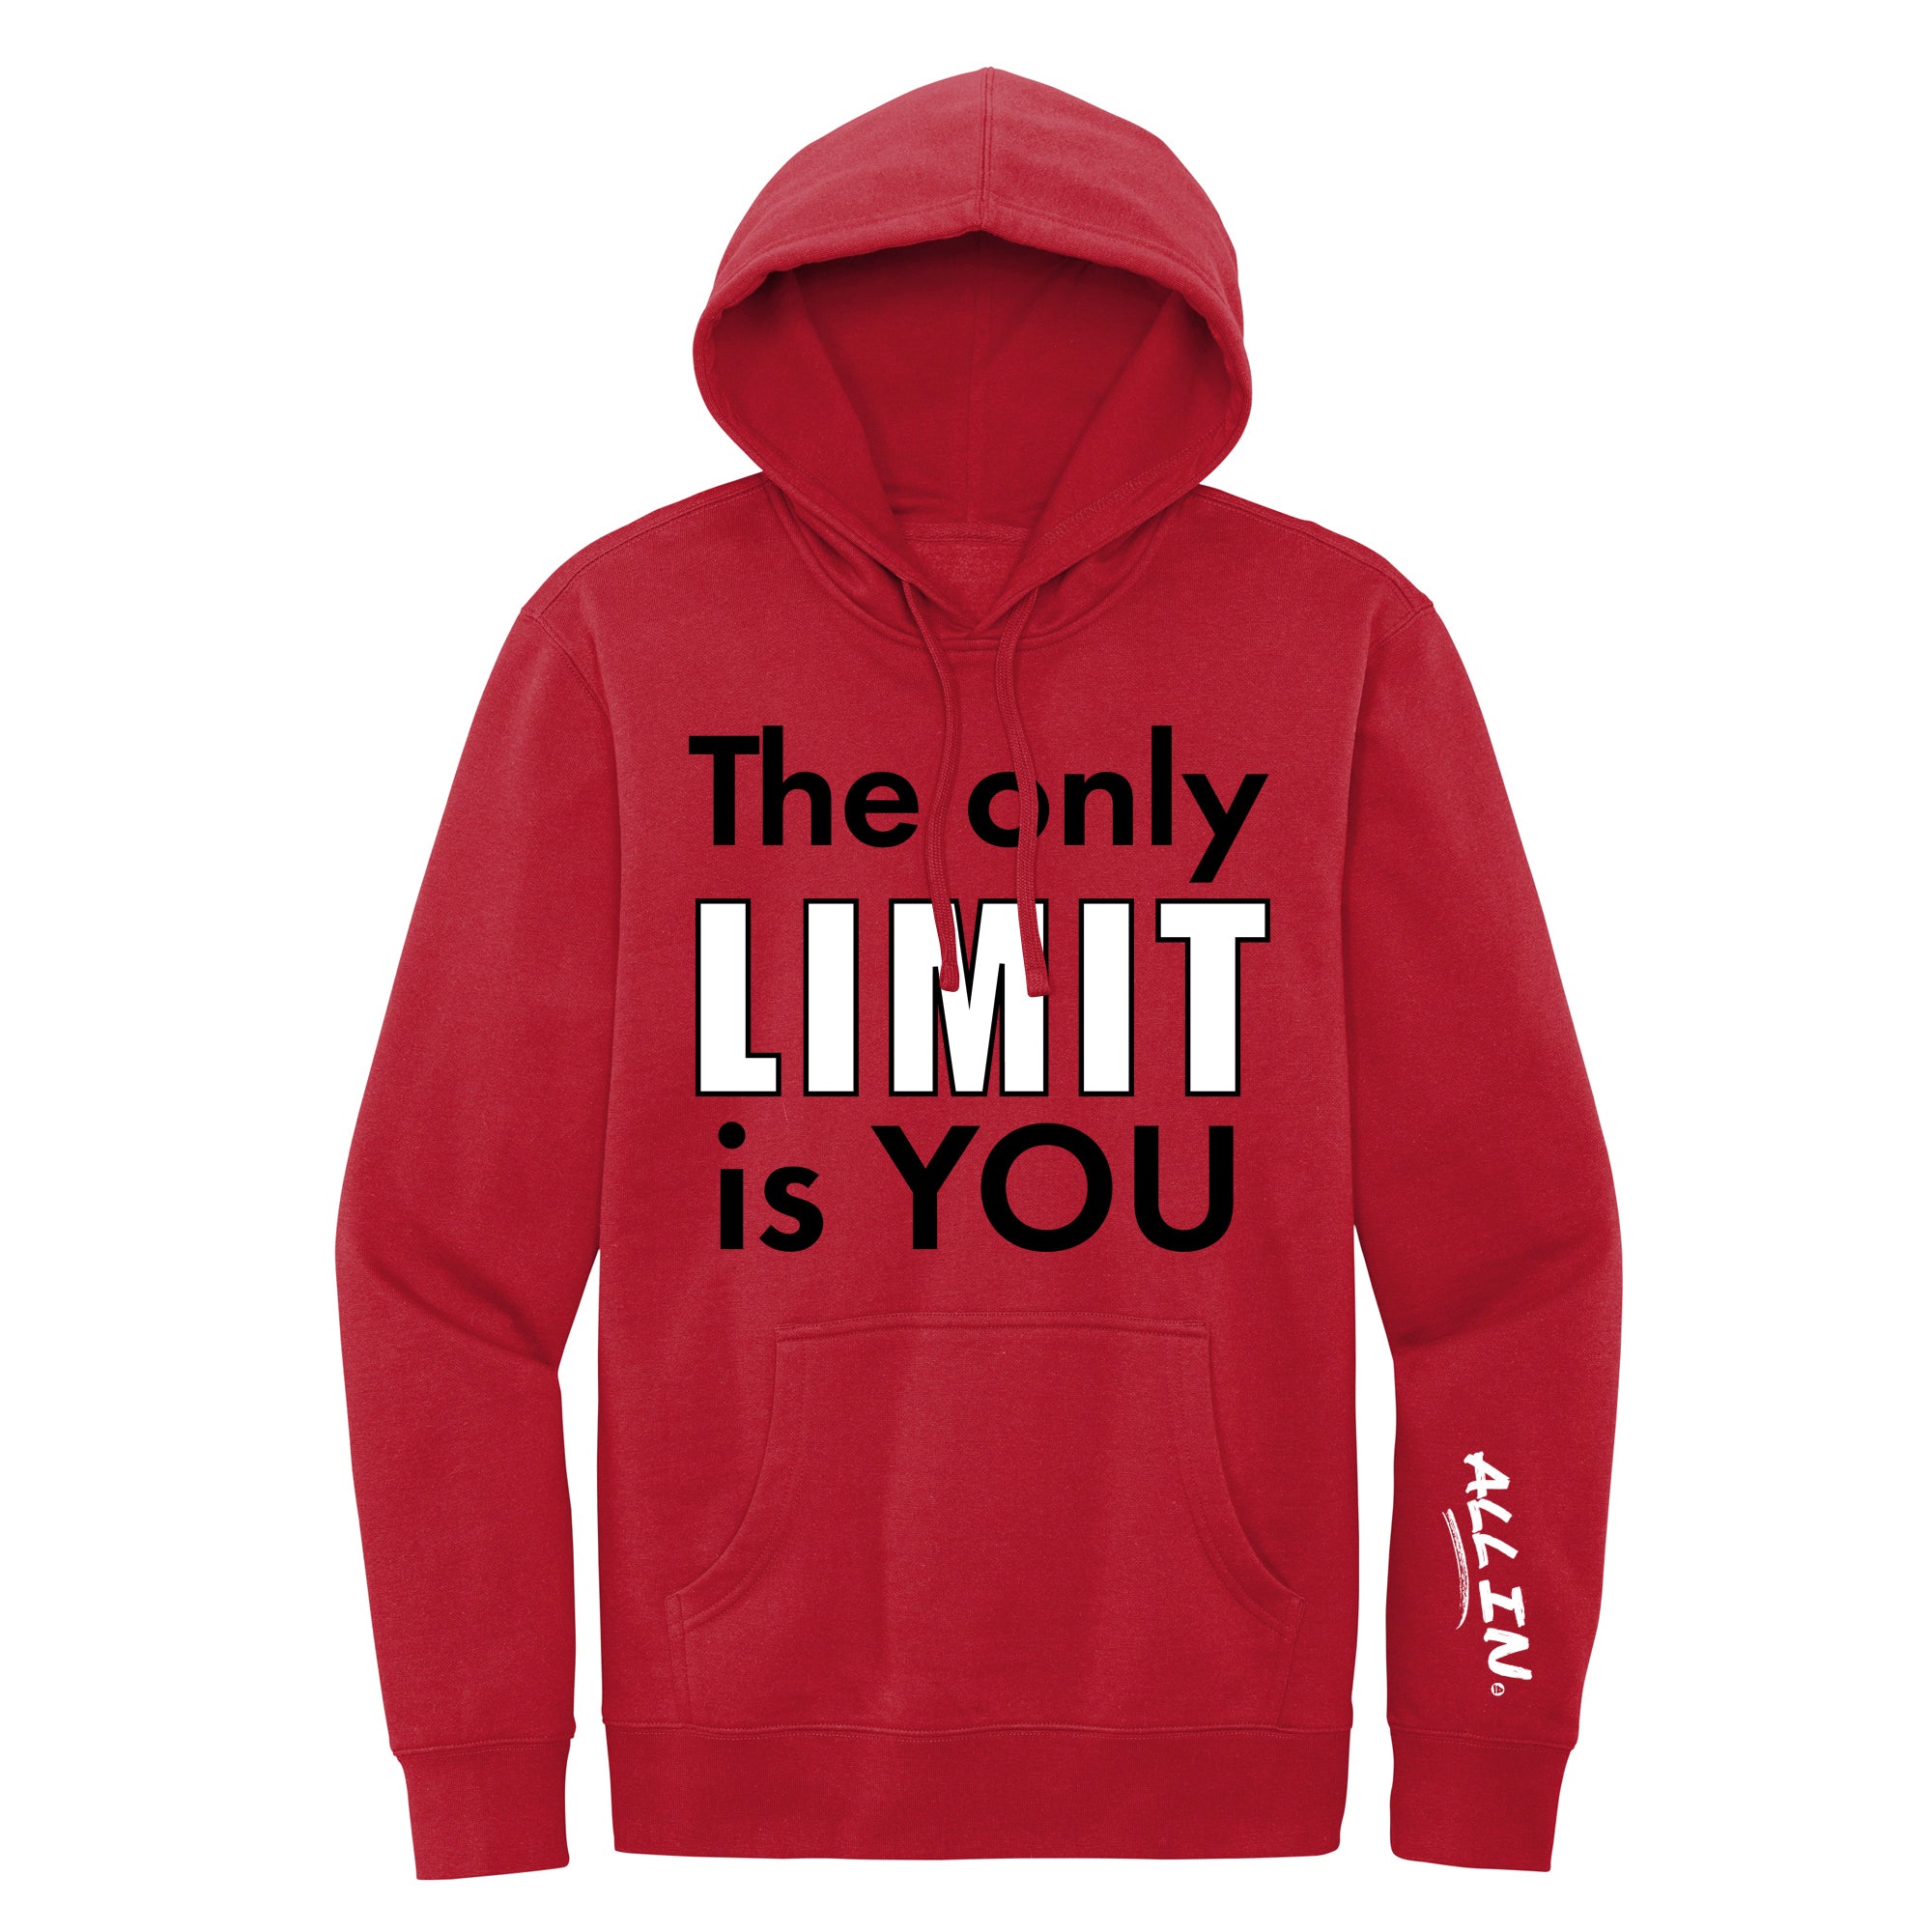 "The Only Limit is You" Hoodie- Benefitting the American Diabetes Association